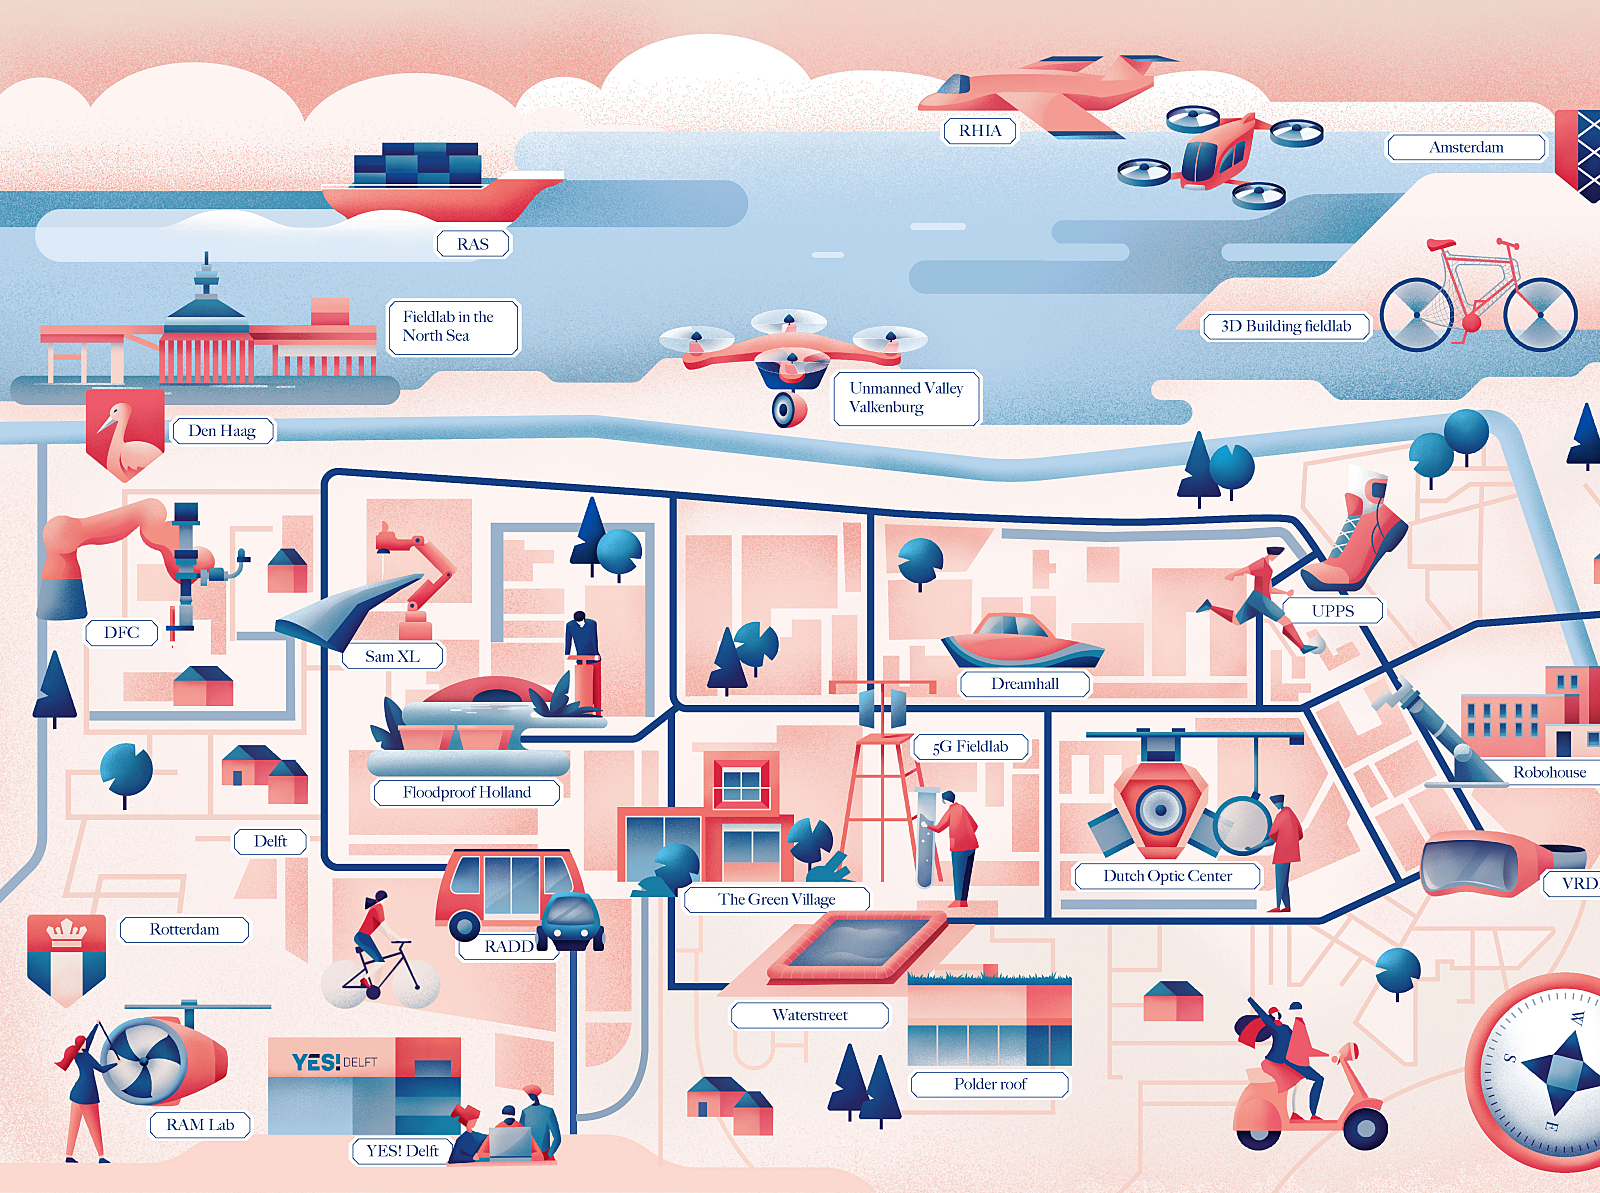 Tu Delft Campus Map By Sail Ho Studio On Dribbble